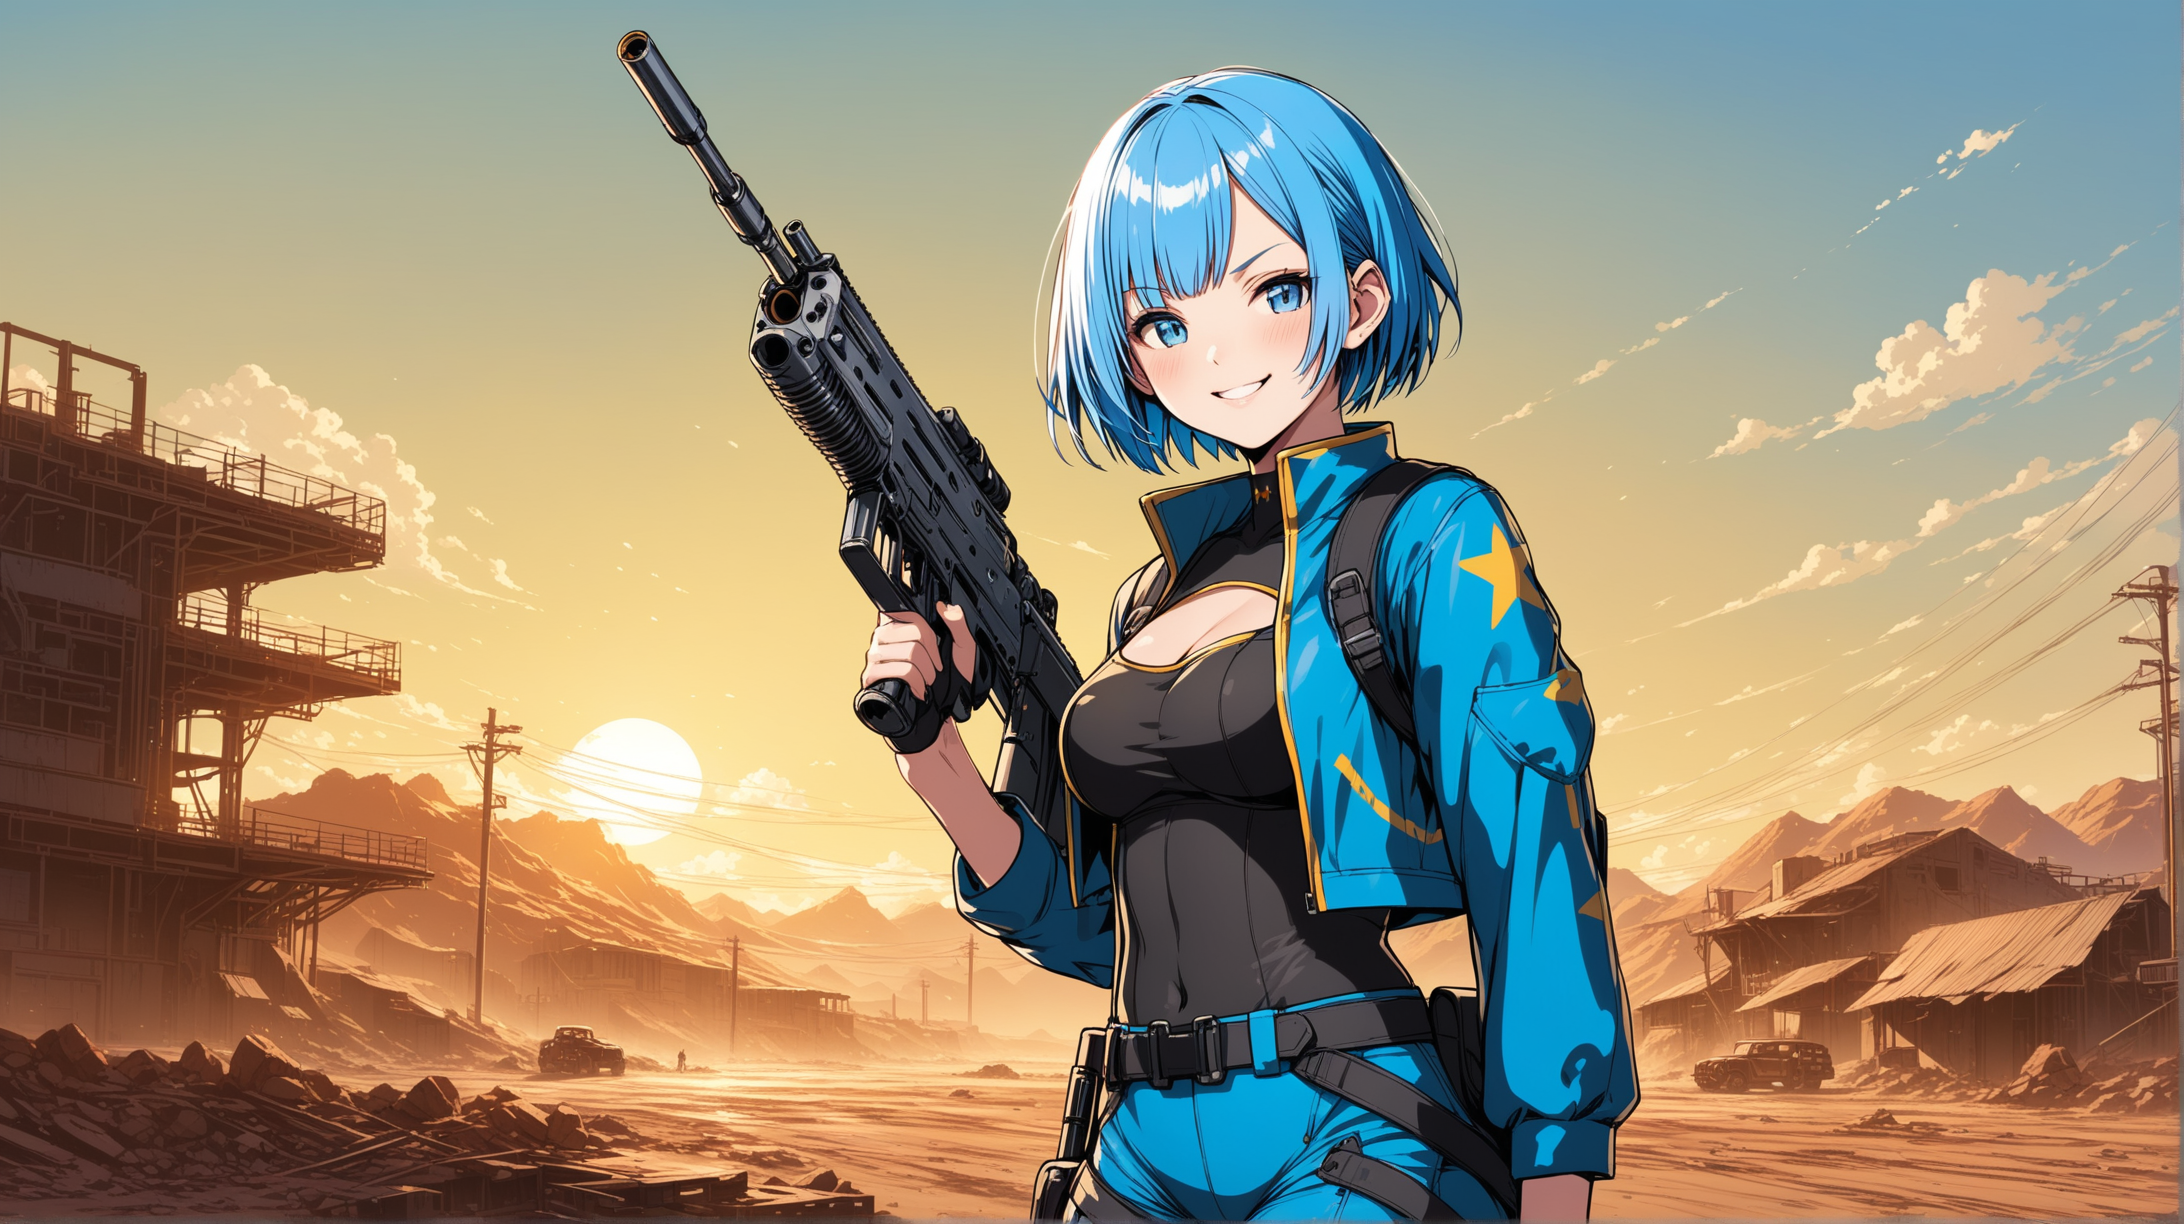 Confident Outdoor Portrait of Rem with Modern Weapon Inspired by Fallout Series